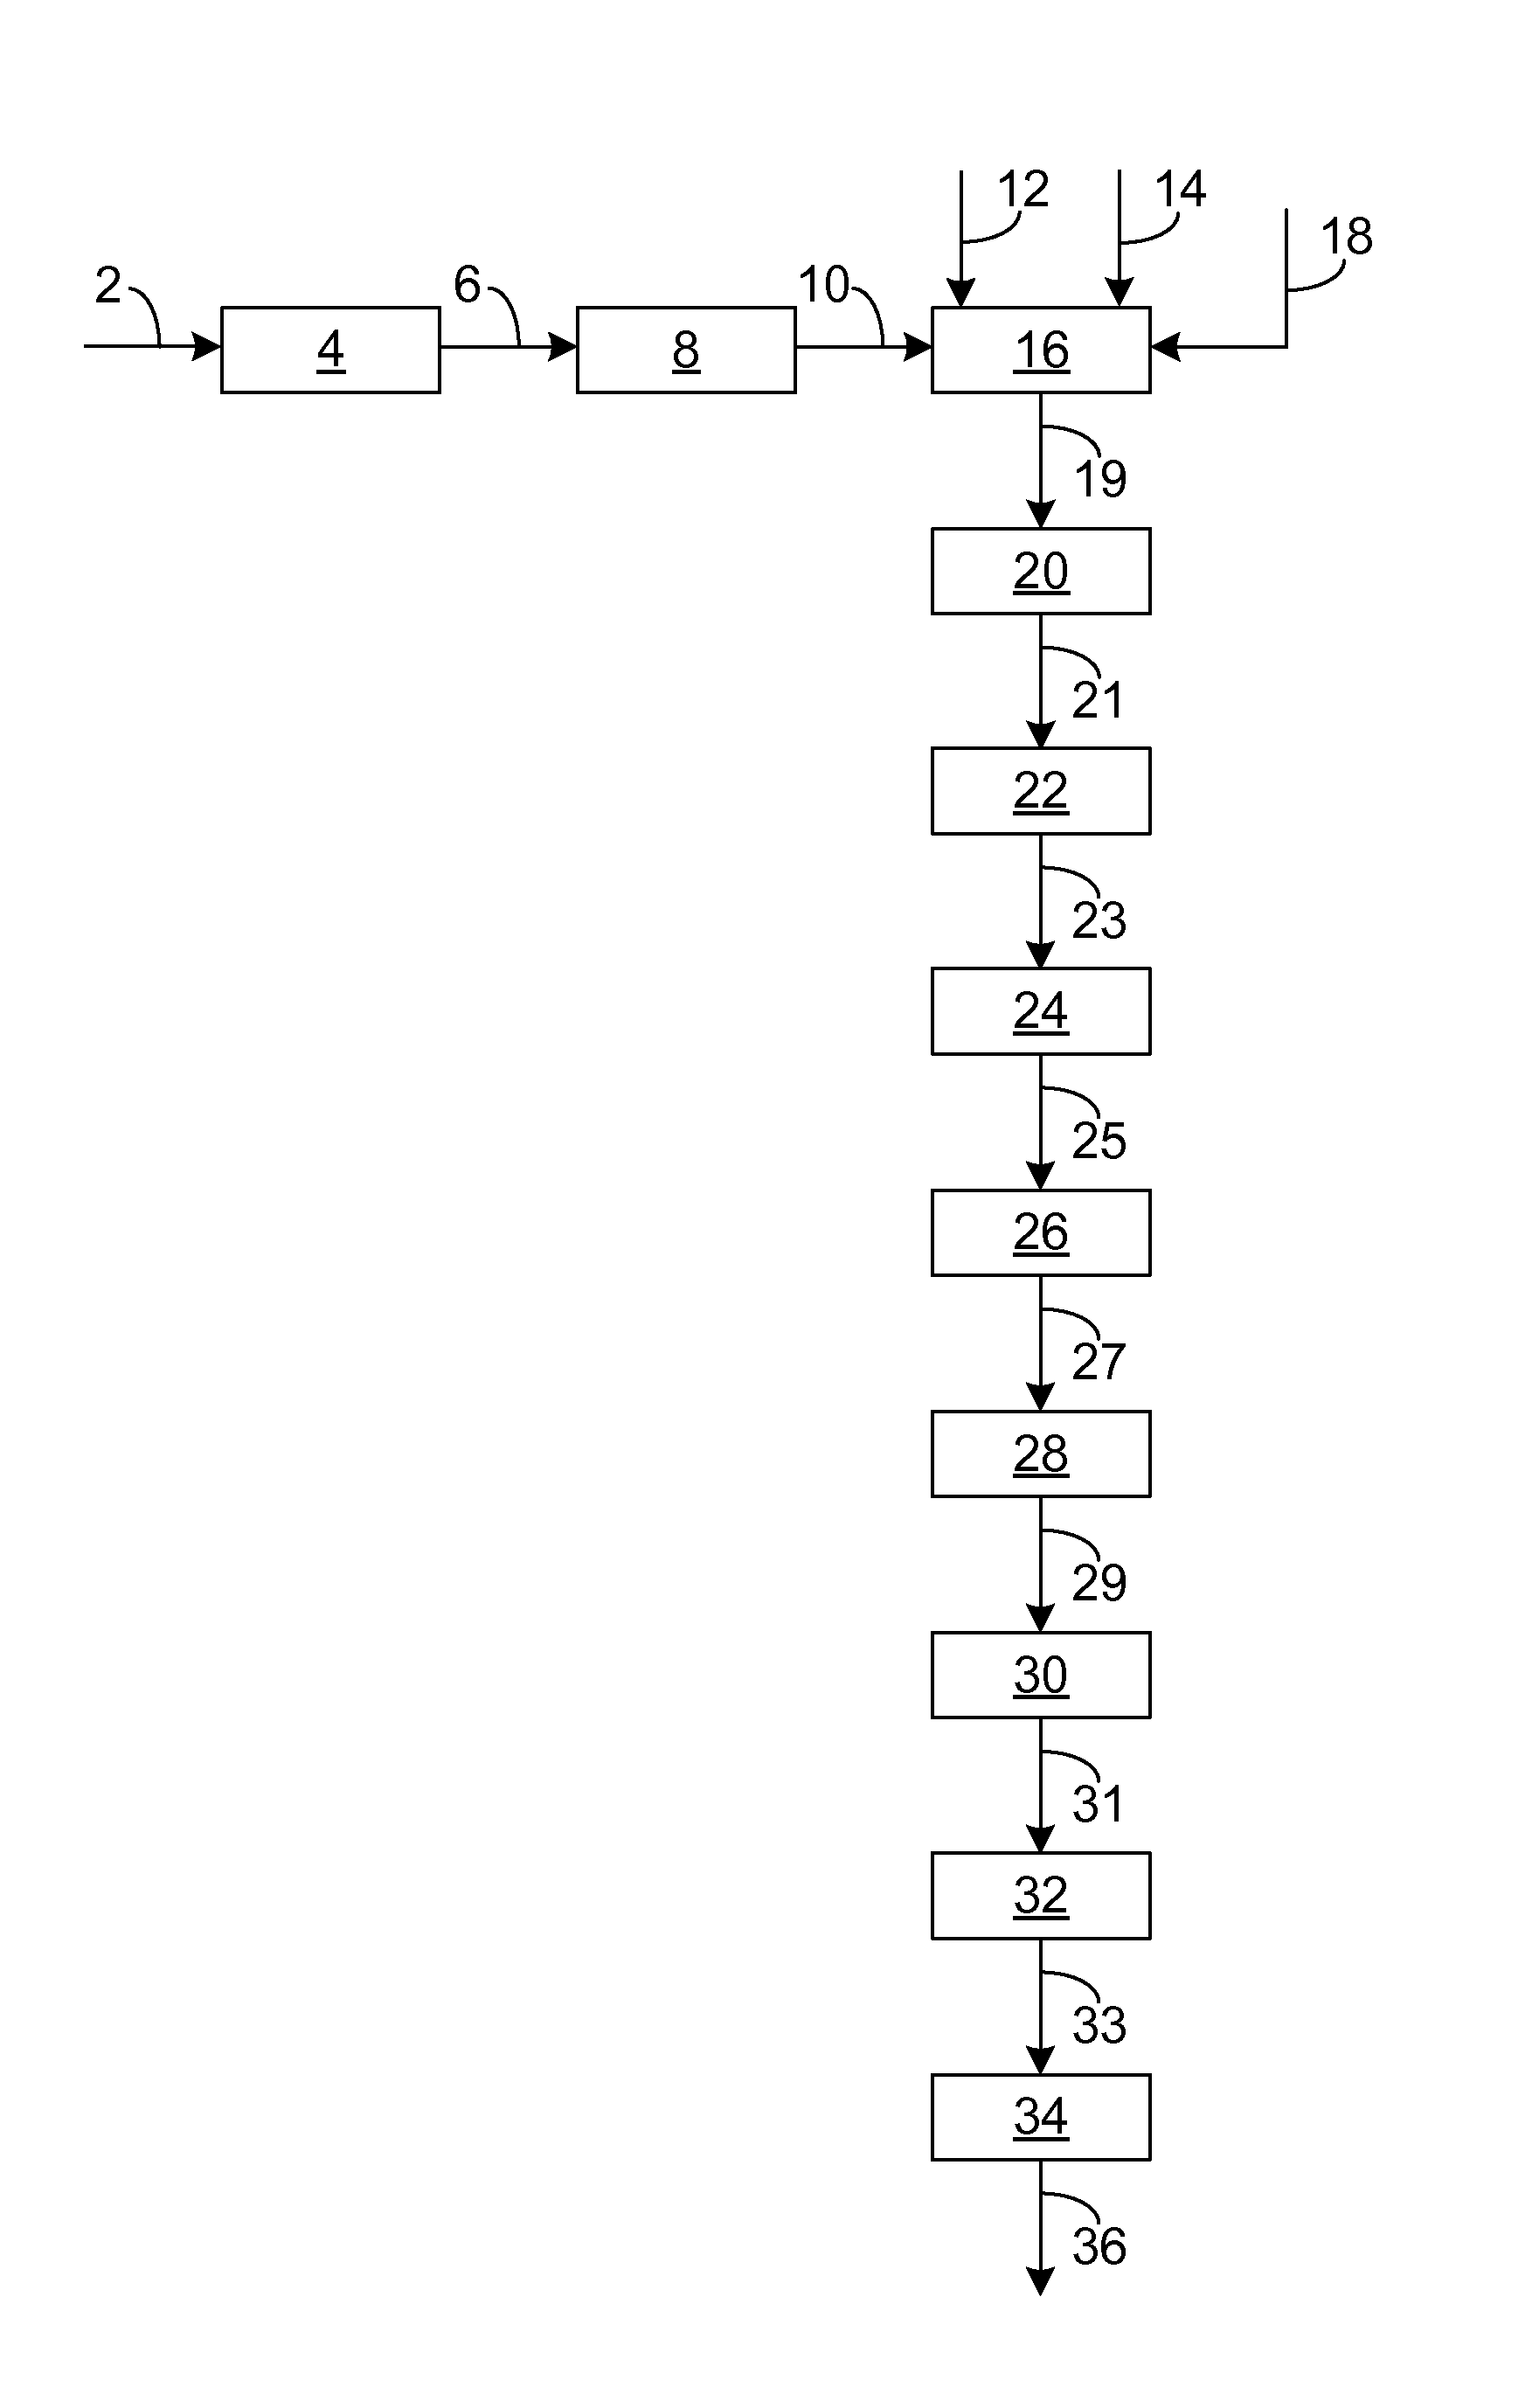 Fluid separation assembly to remove condensable contaminants and methane conversion process using a supersonic flow reactor